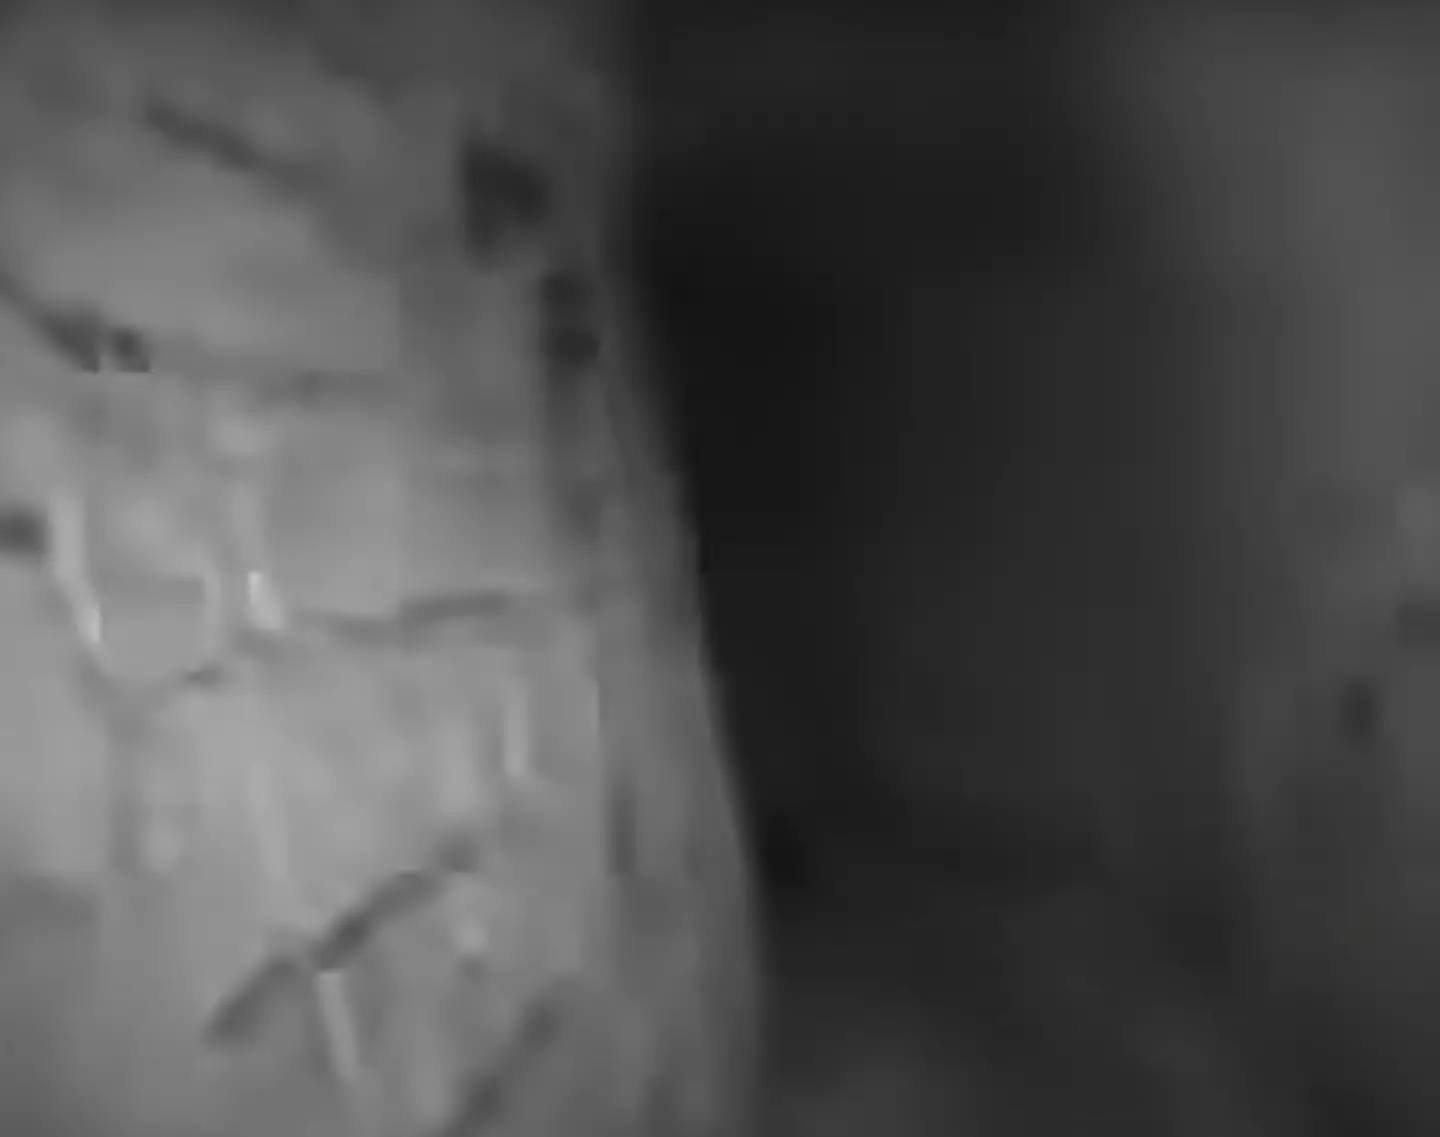 The found footage showed someone running through the Paris Catacombs. (ABC)